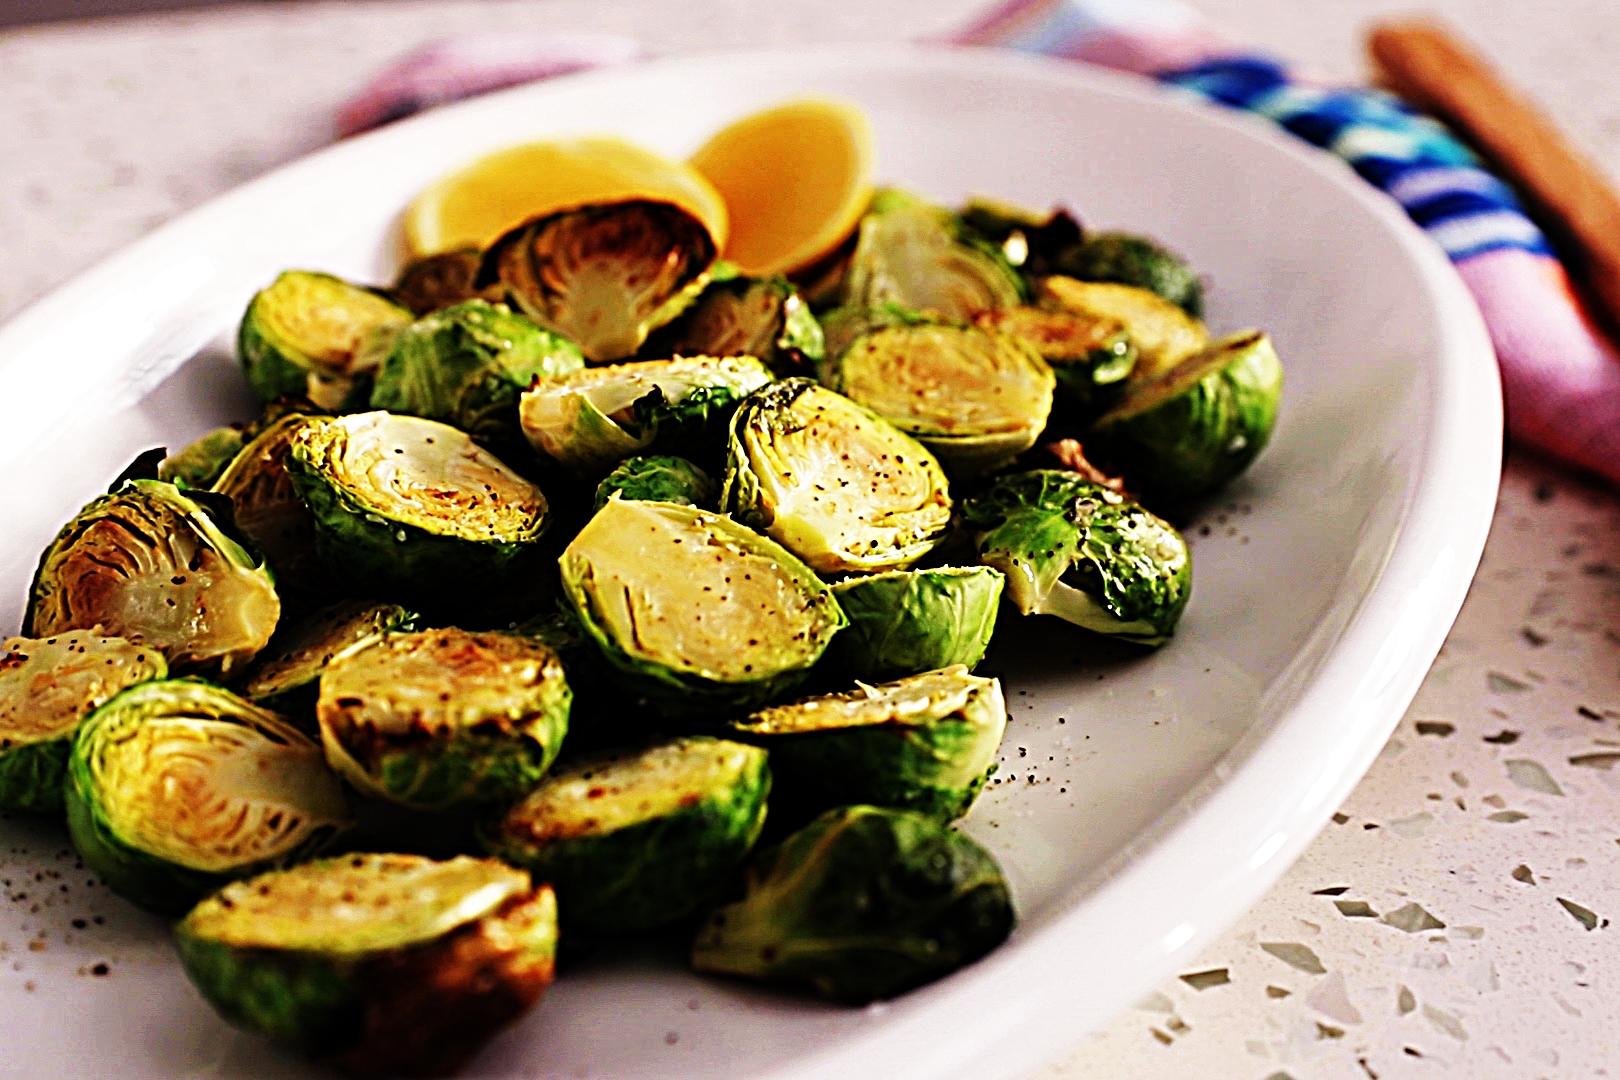 Stupid-Easy Recipe for Fat-Free Roasted Brussels Sprouts (#1 Top-Rated)